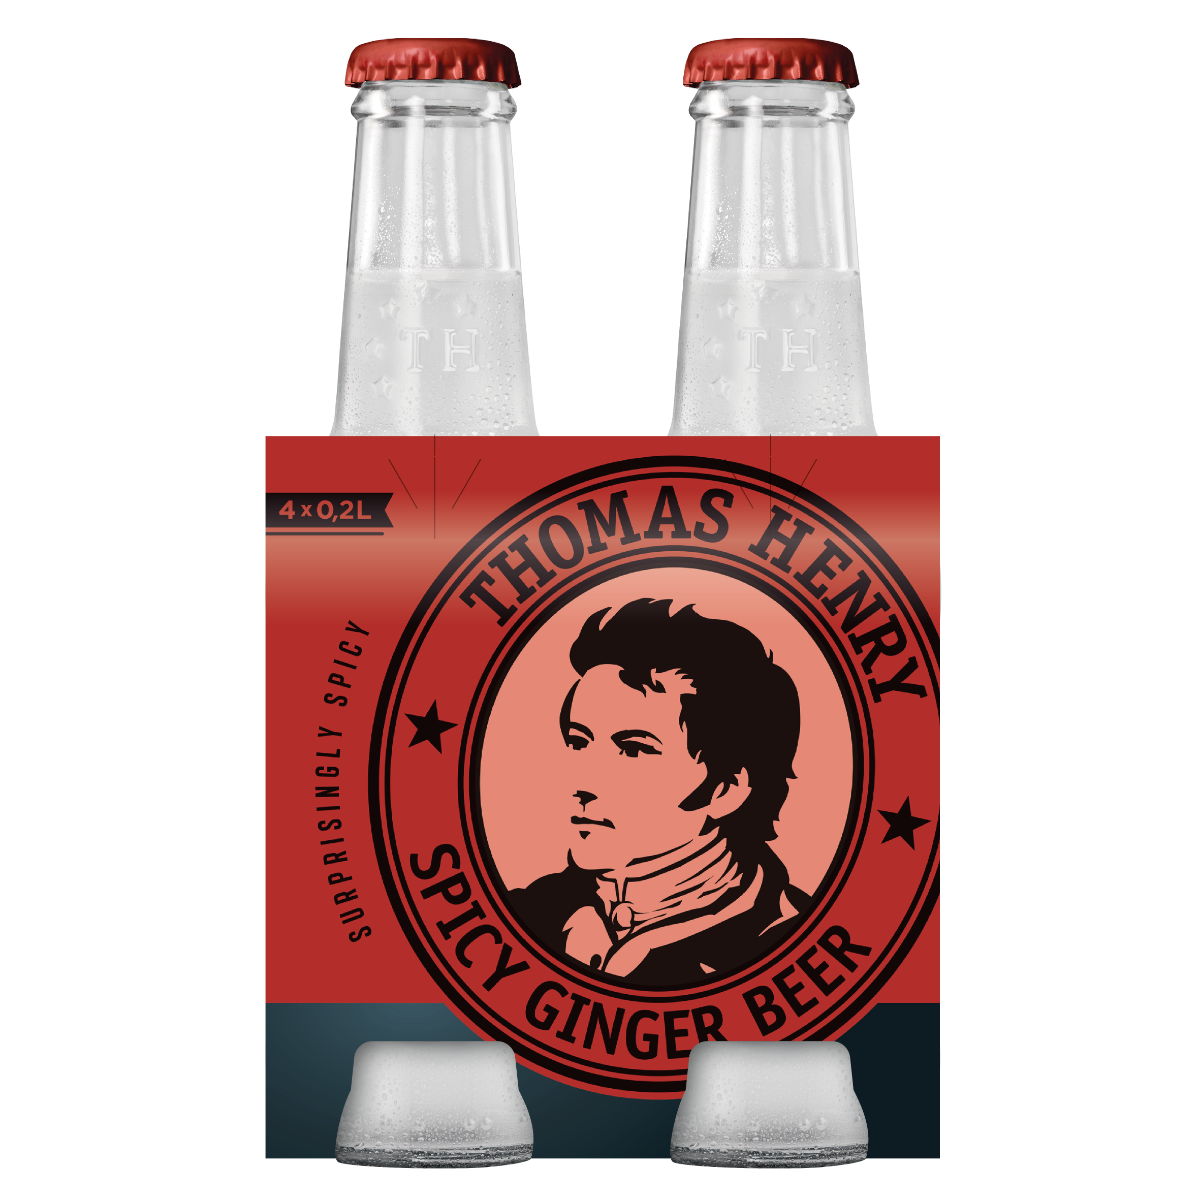 Thomas Henry Spicy Ginger Beer, 0,2l x 4 ks (4 pack)